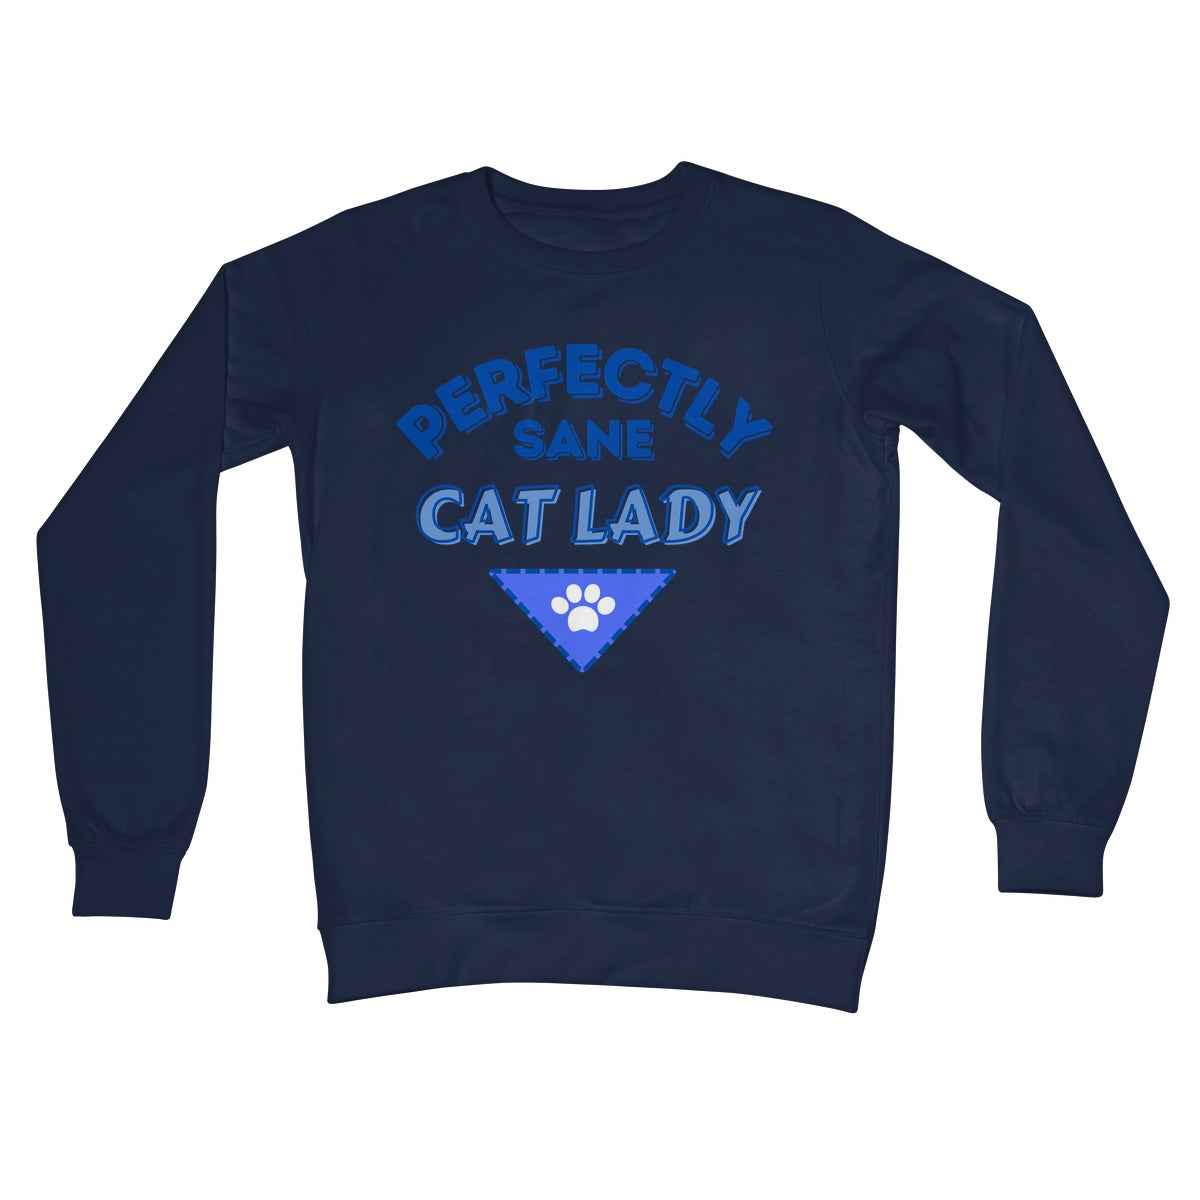 perfectly sane cat lady jumper navy